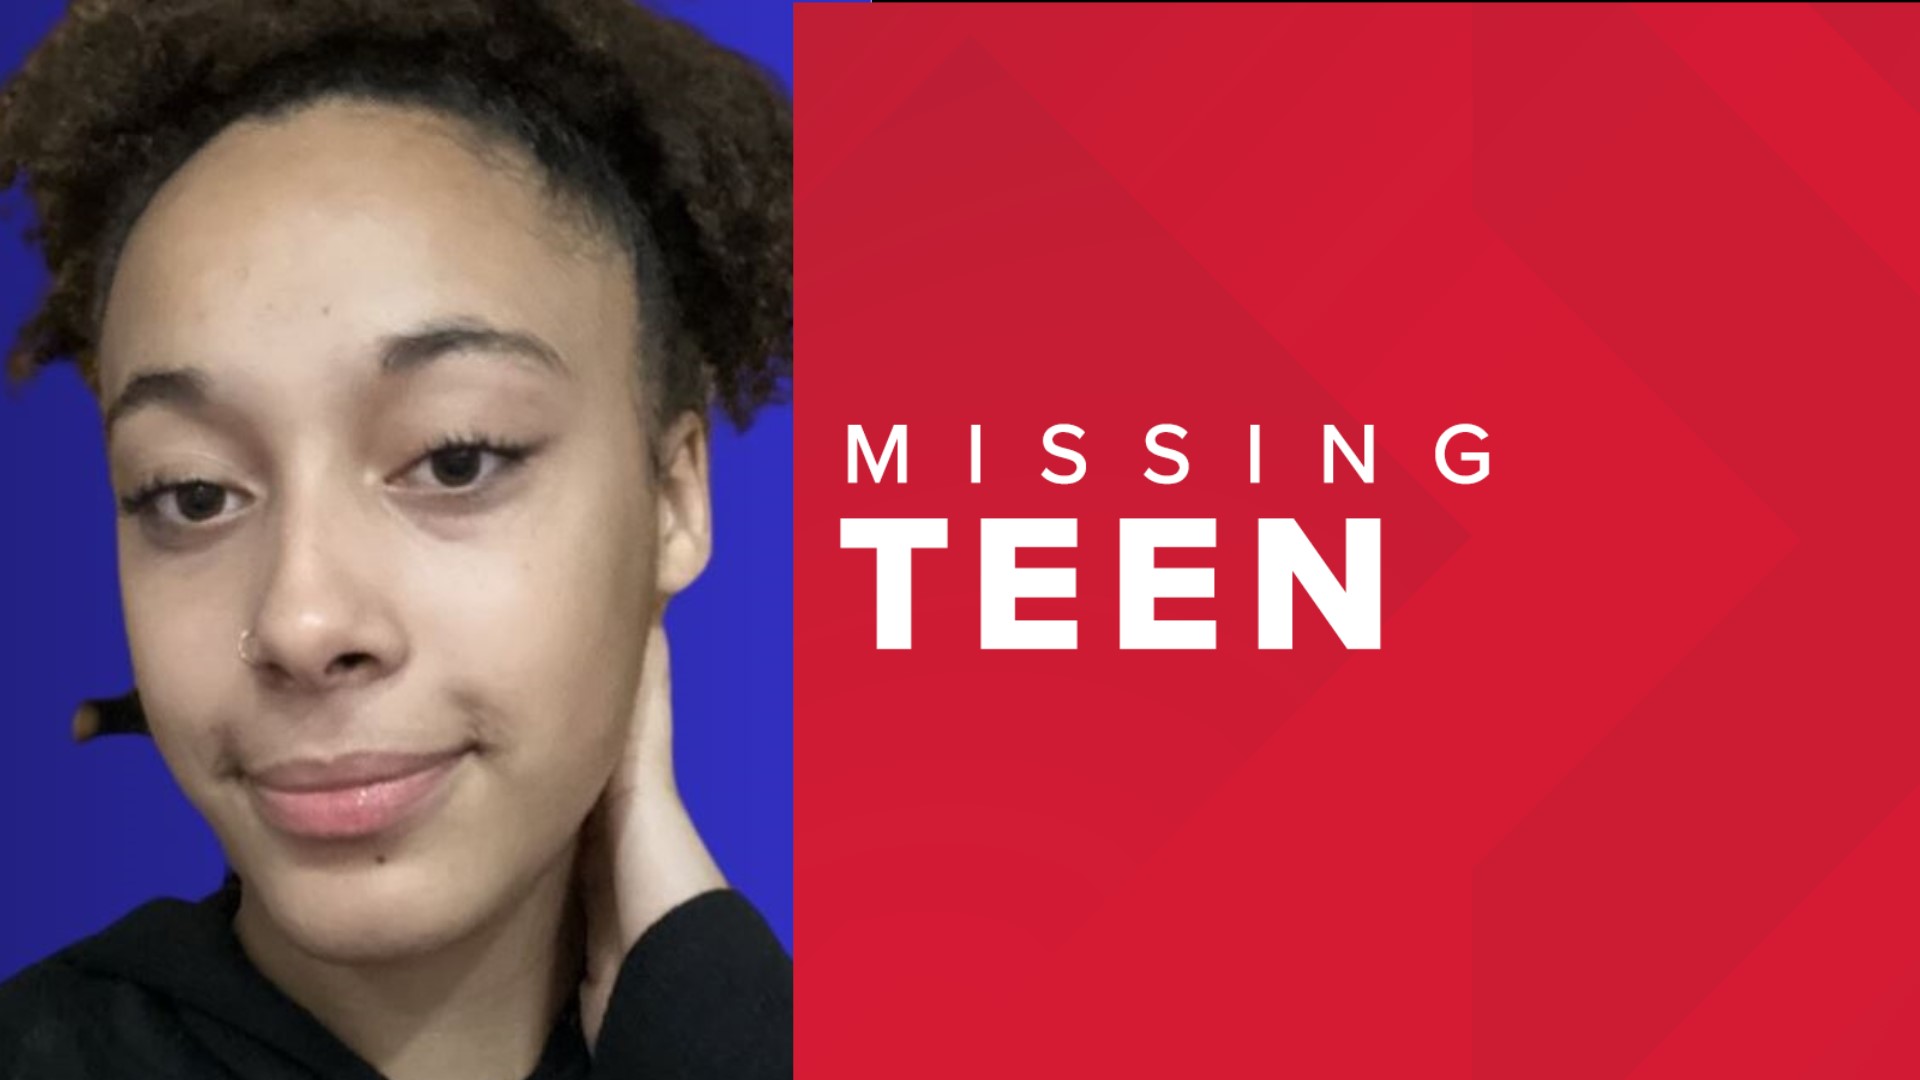 ​Police say 15-year-old Damarianna "Ari" James-Graham left a residence on 2nd Avenue on Sunday evening and has not been seen since.